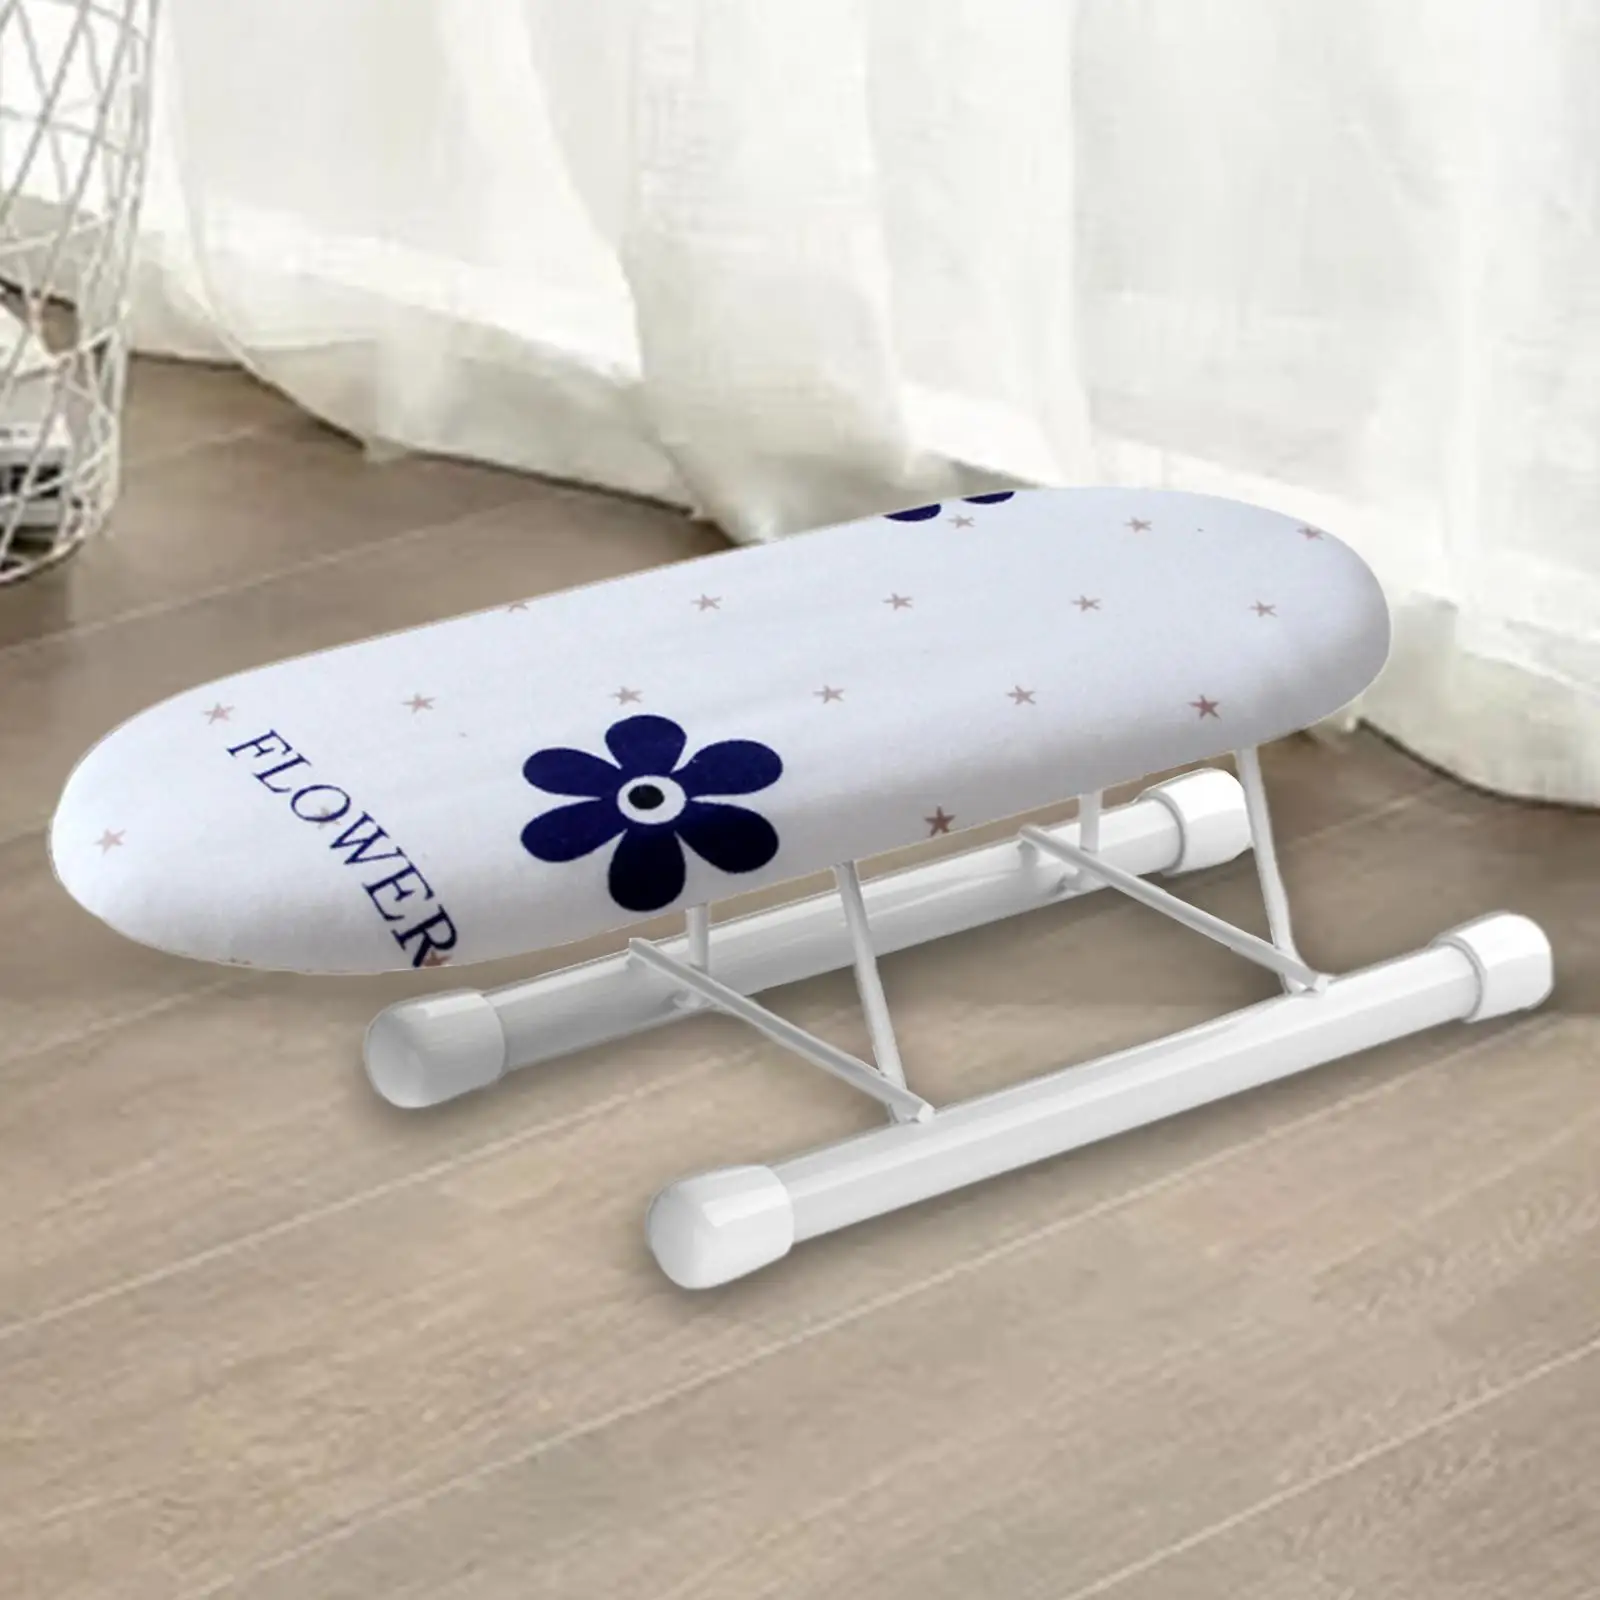 Table Top Ironing Board Removeable Thick Ironing Pad with Folding Legs for Household